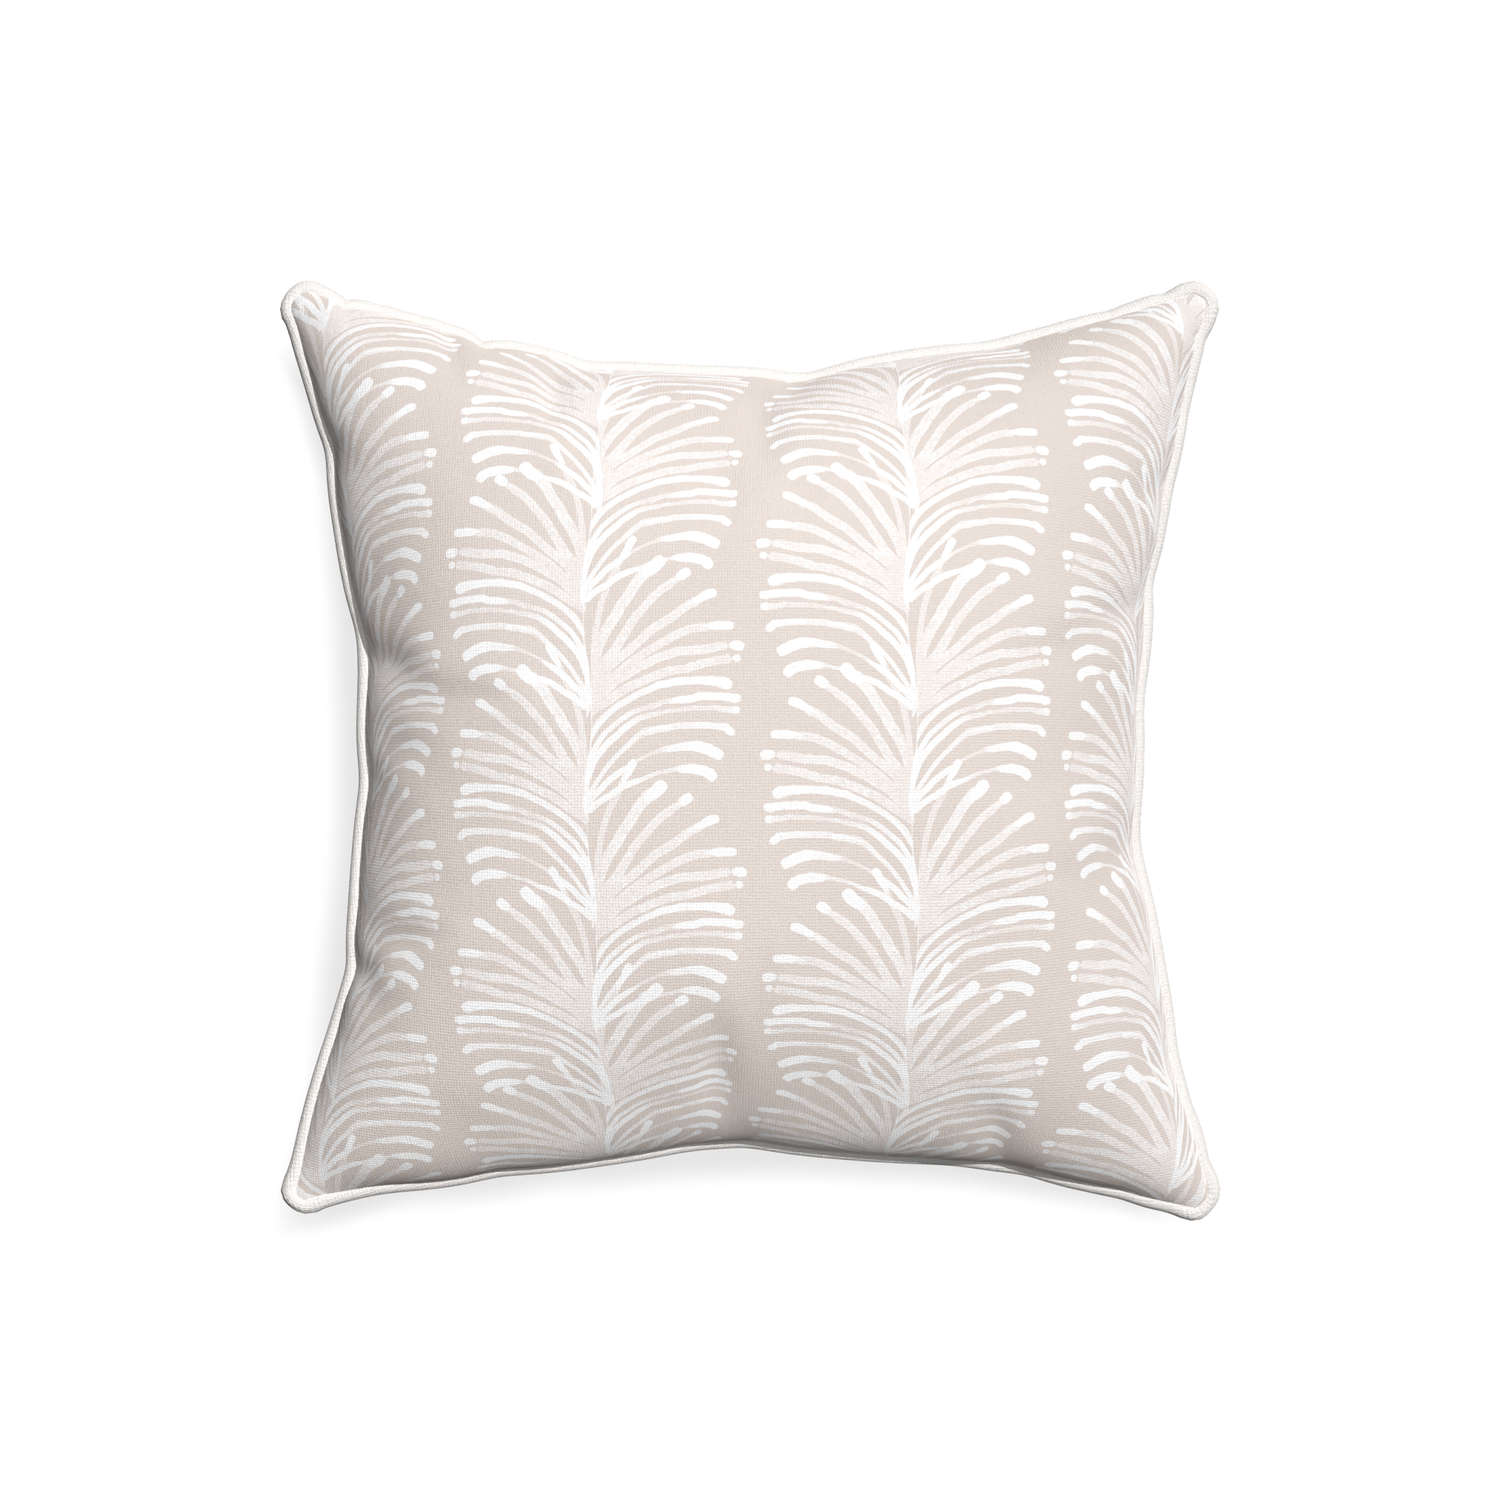 20-square emma sand custom sand colored botanical stripepillow with snow piping on white background